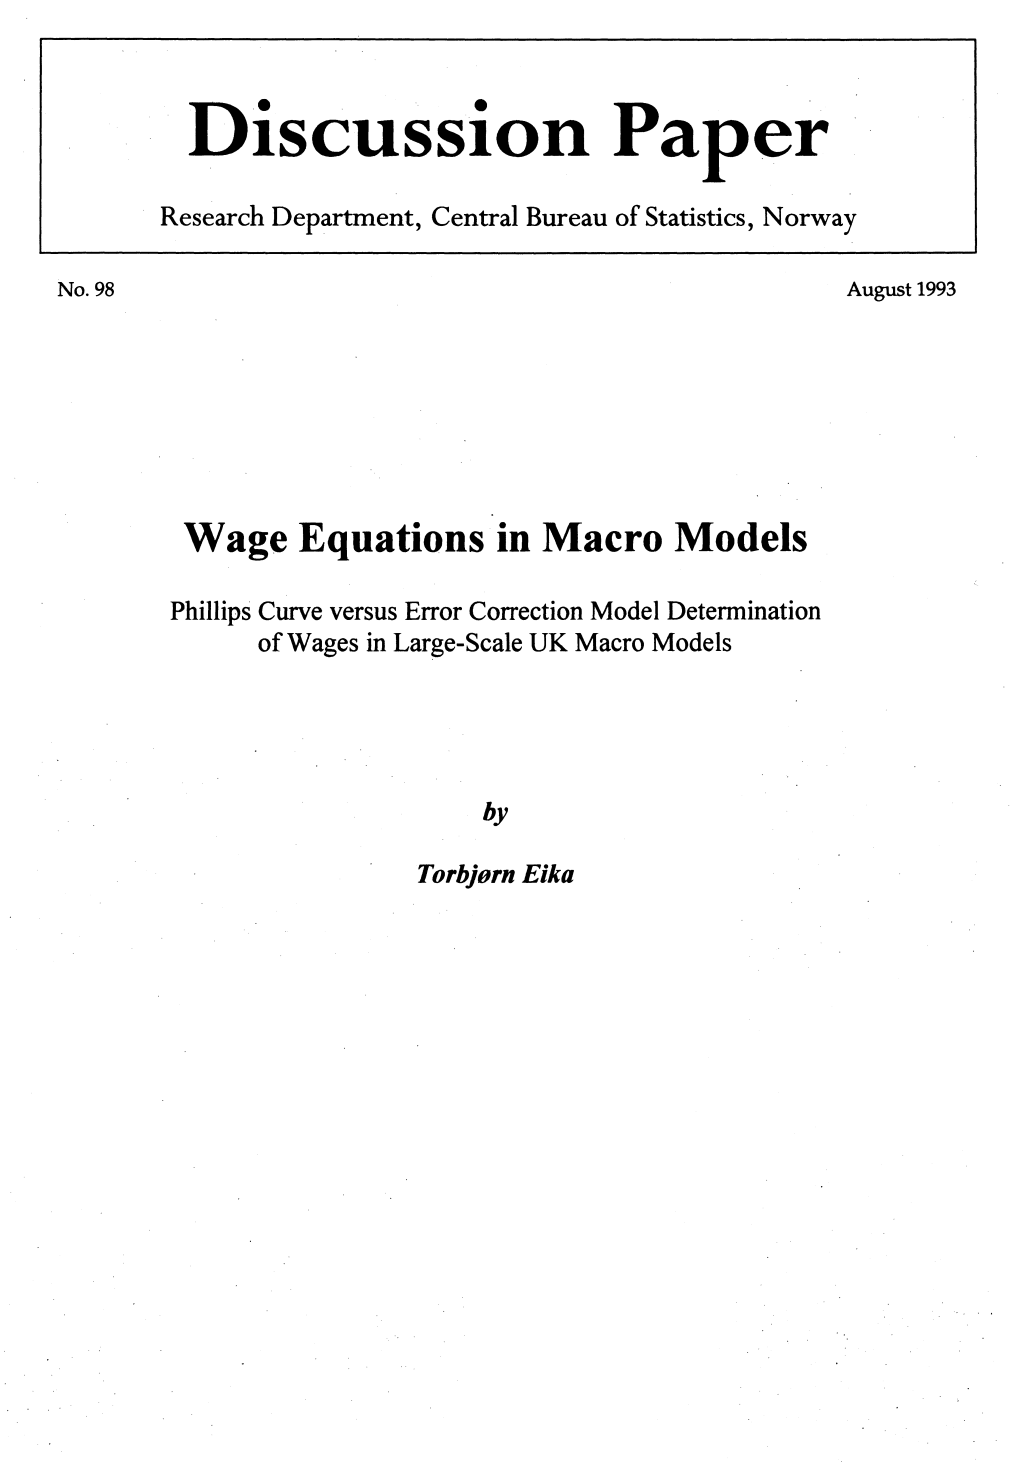 Wage Equations in Macro Models